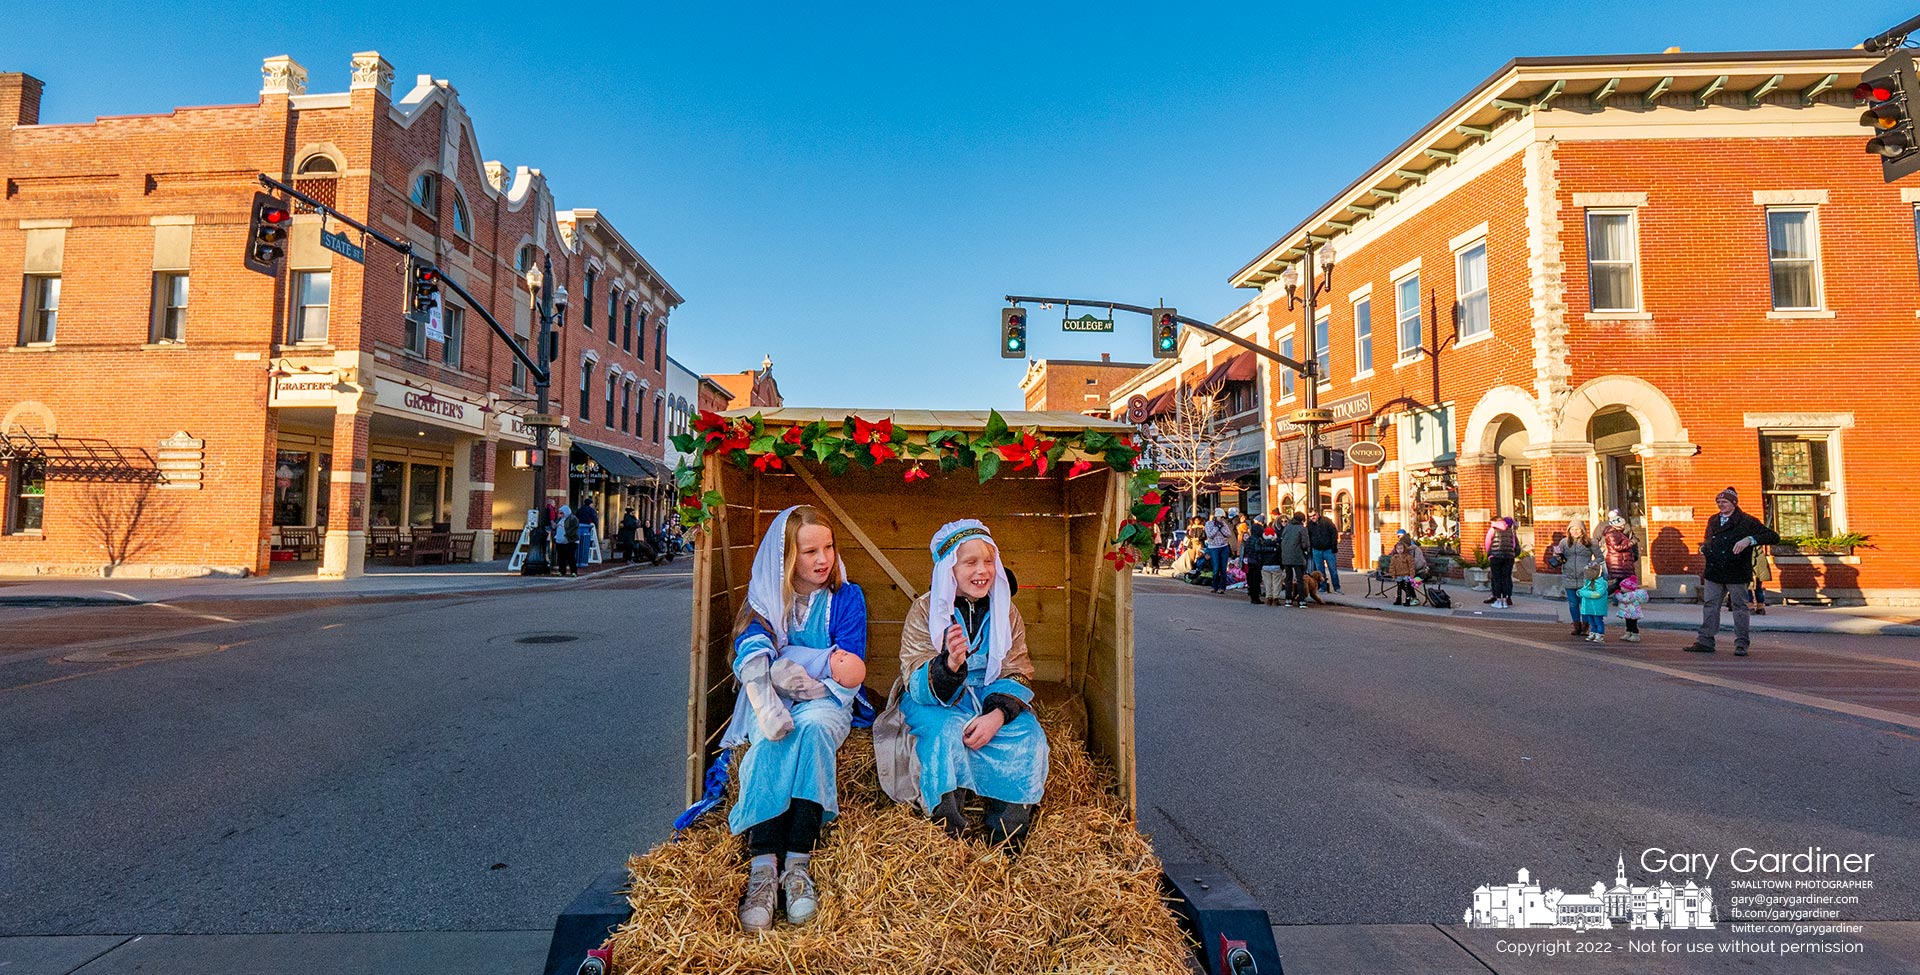 Mary, Joseph, and their baby, Jesus, ride backward in a hay-covered trailer float where they followed high school bands, dance groups, and martial arts students in the annual Christmas parade through Uptown Westerville. My Final Photo for December 4, 2022.